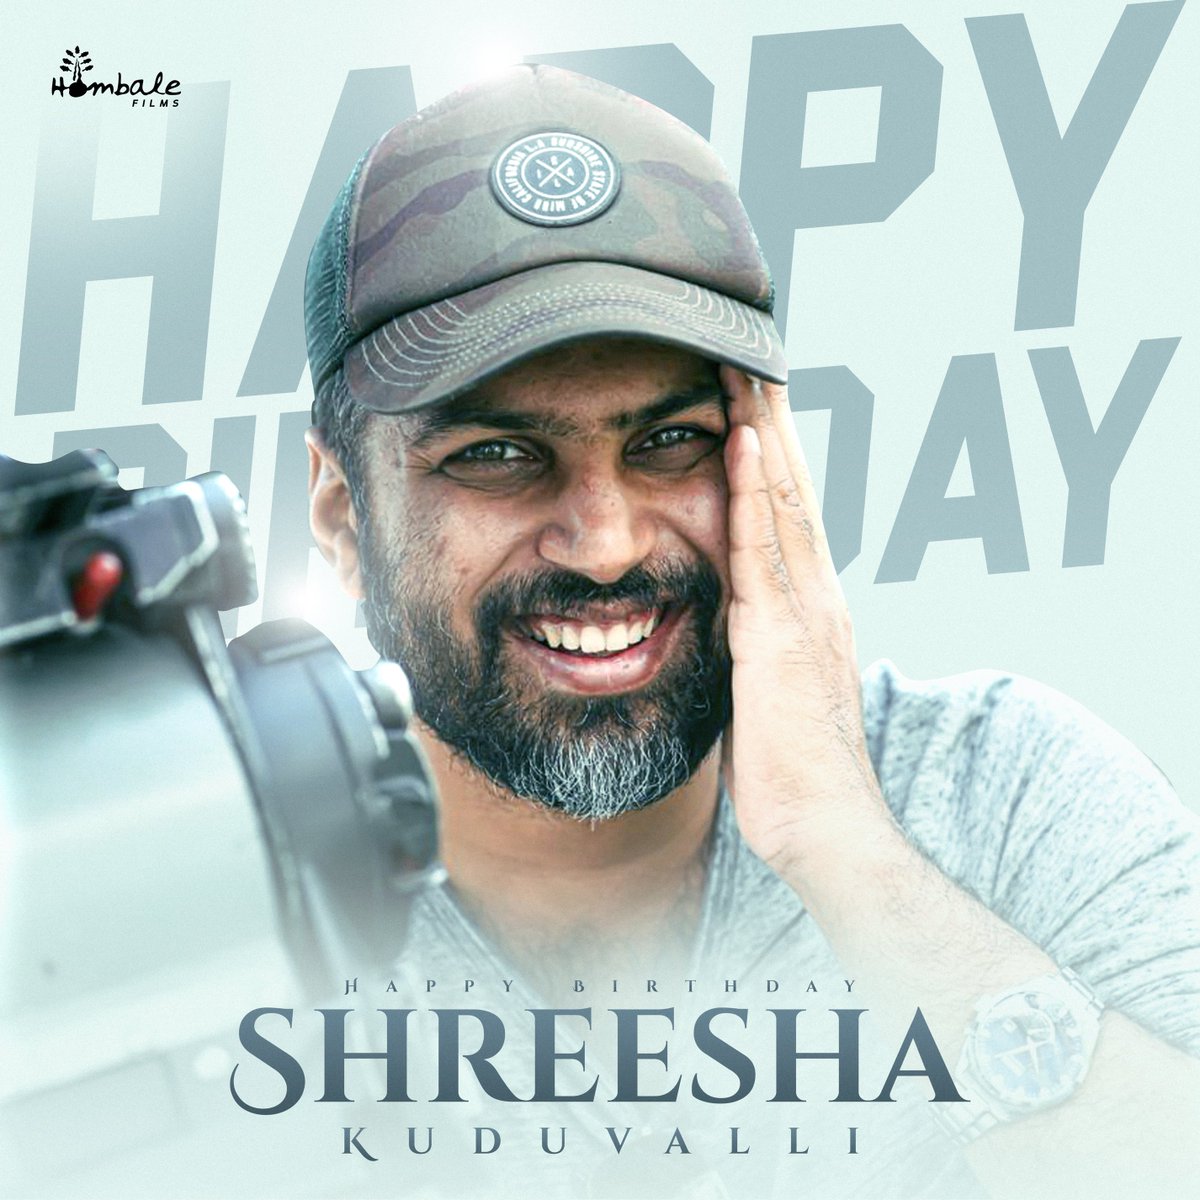 Birthday wishes to our talented Cinematographer @DopShreesha! Your vision and creativity bring magic to every frame. Here’s to an exciting year ahead!